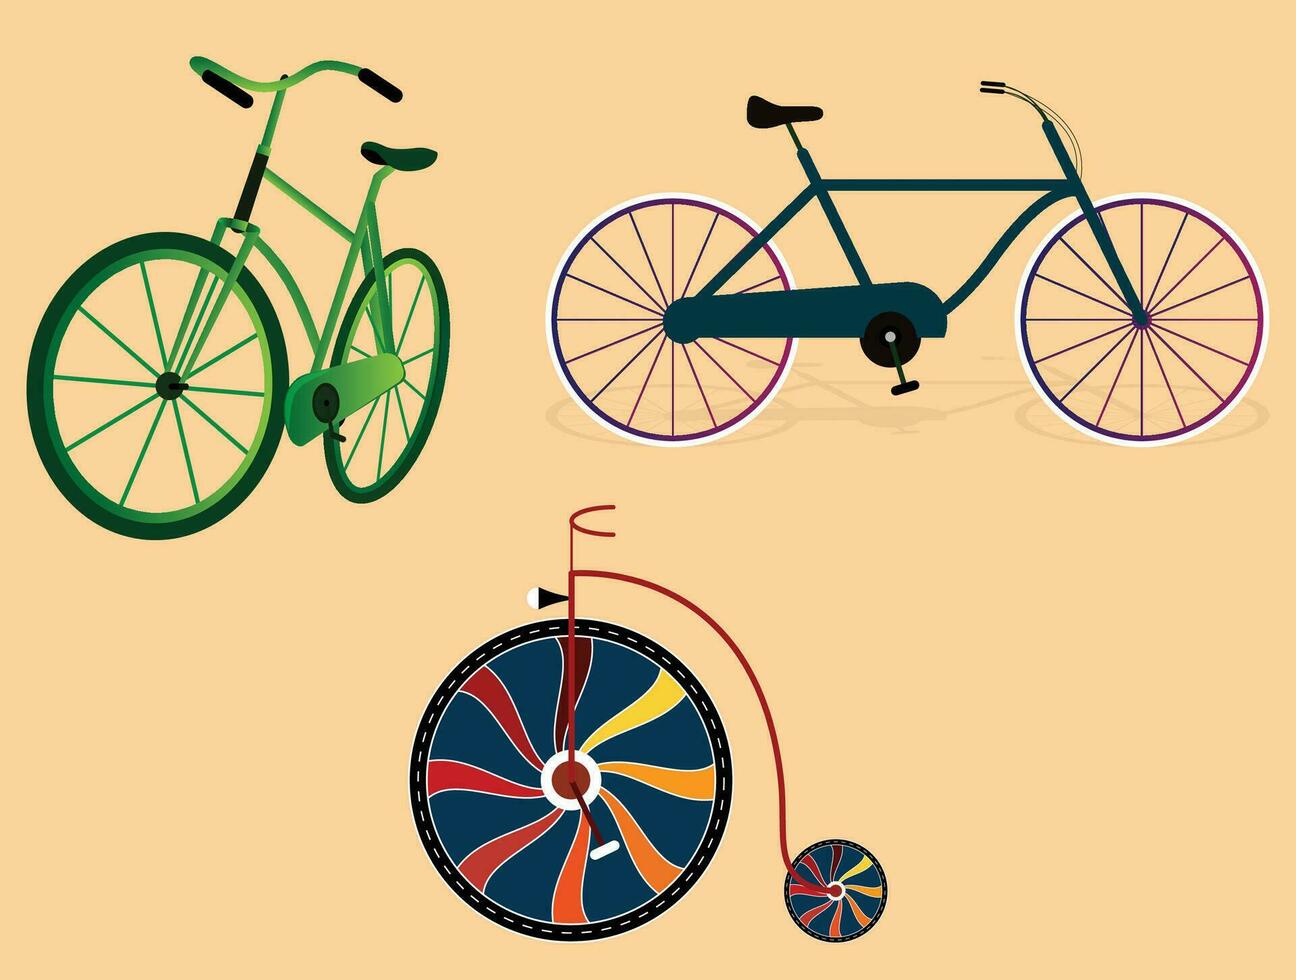 Cycle illustration design vector